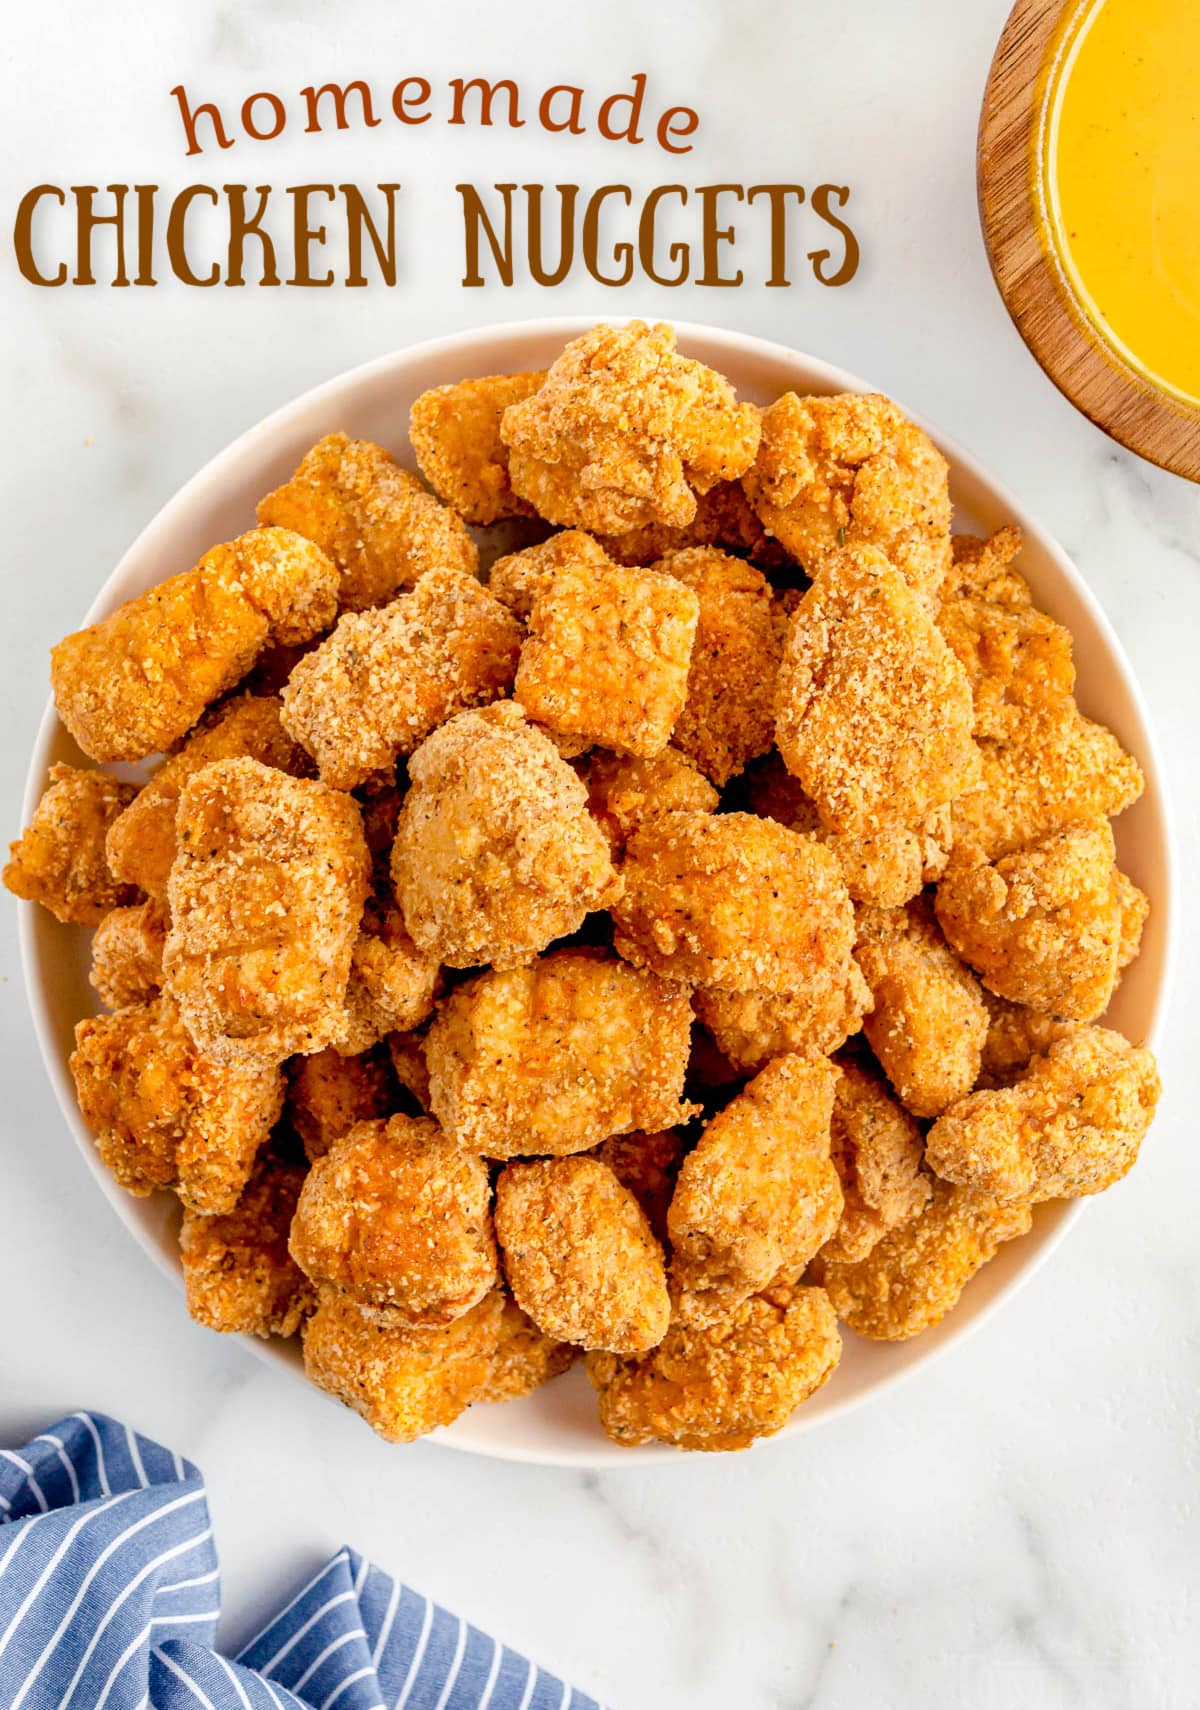 chicken nuggets piled high on white plate with title overlay at top.